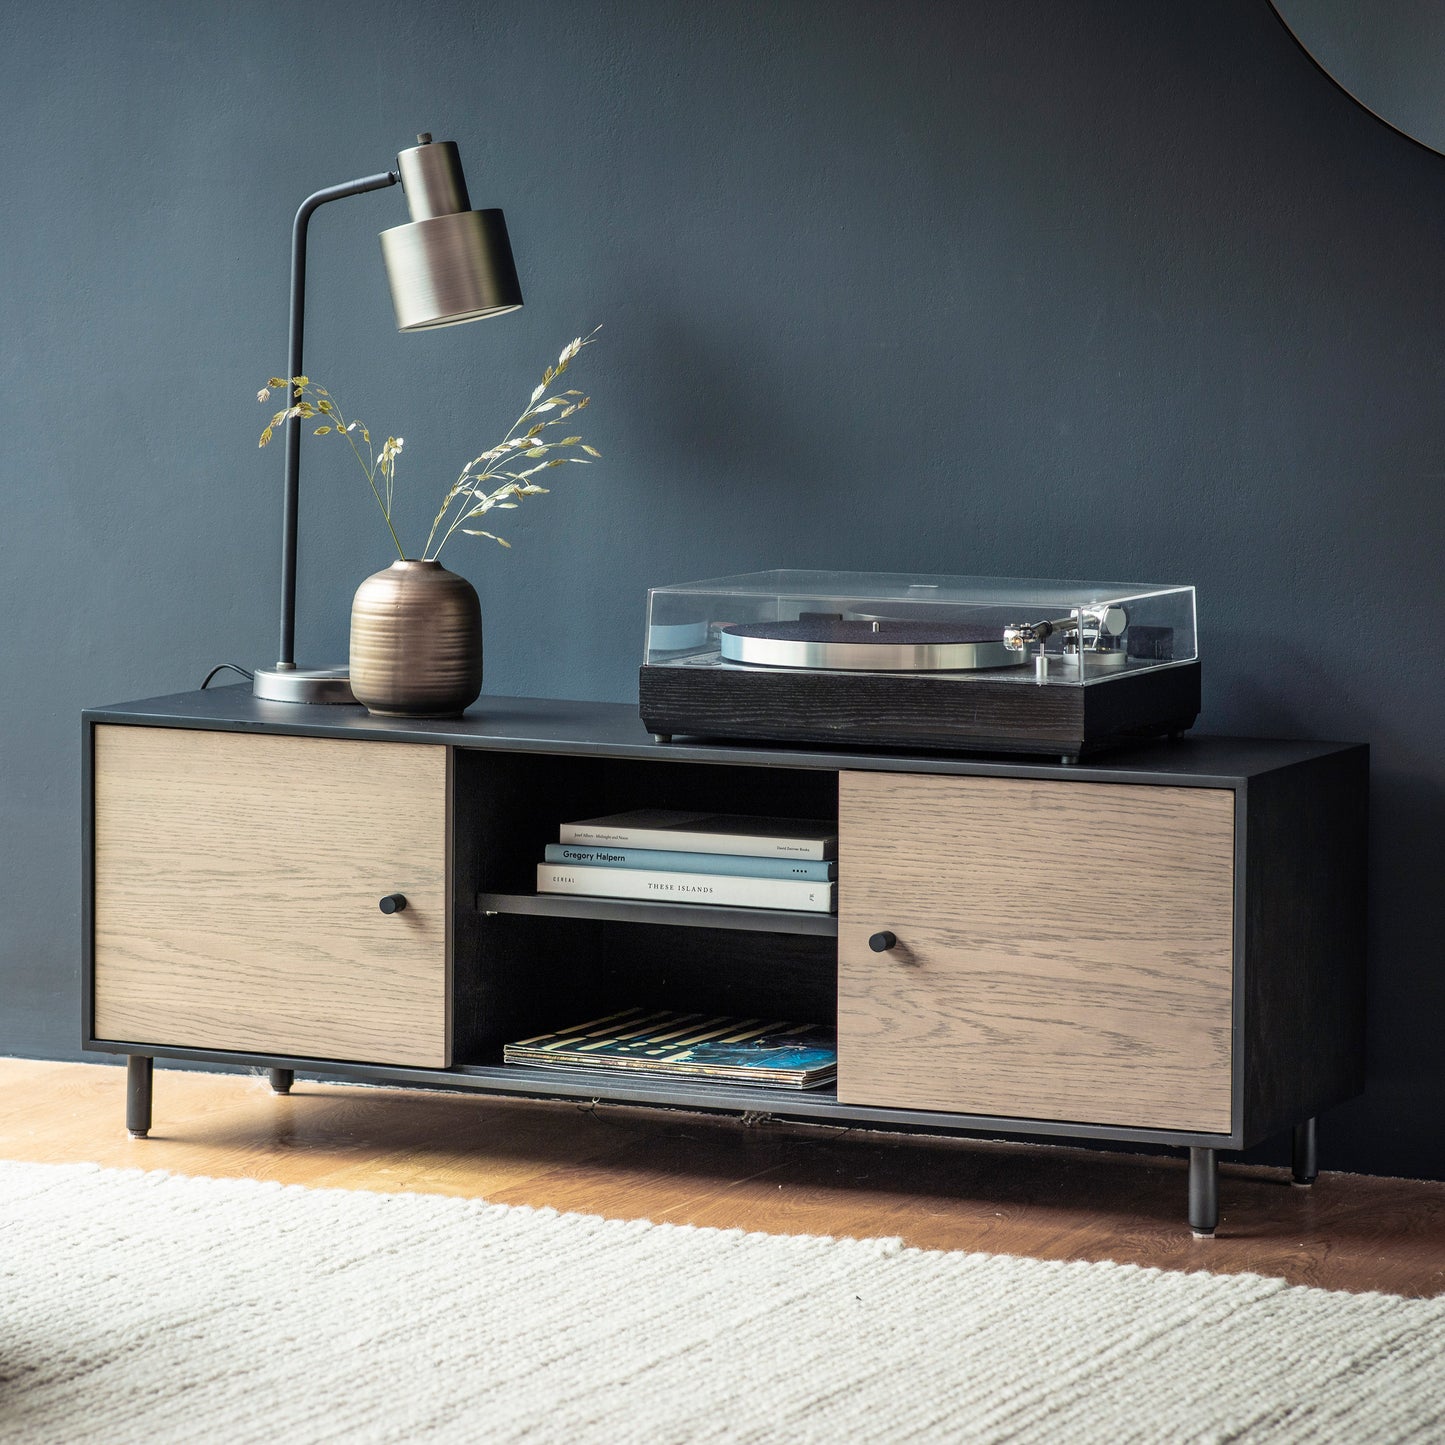 Load image into Gallery viewer, A 1200x400x420mm Prawle Media Unit with record player and lamp for interior decor.
